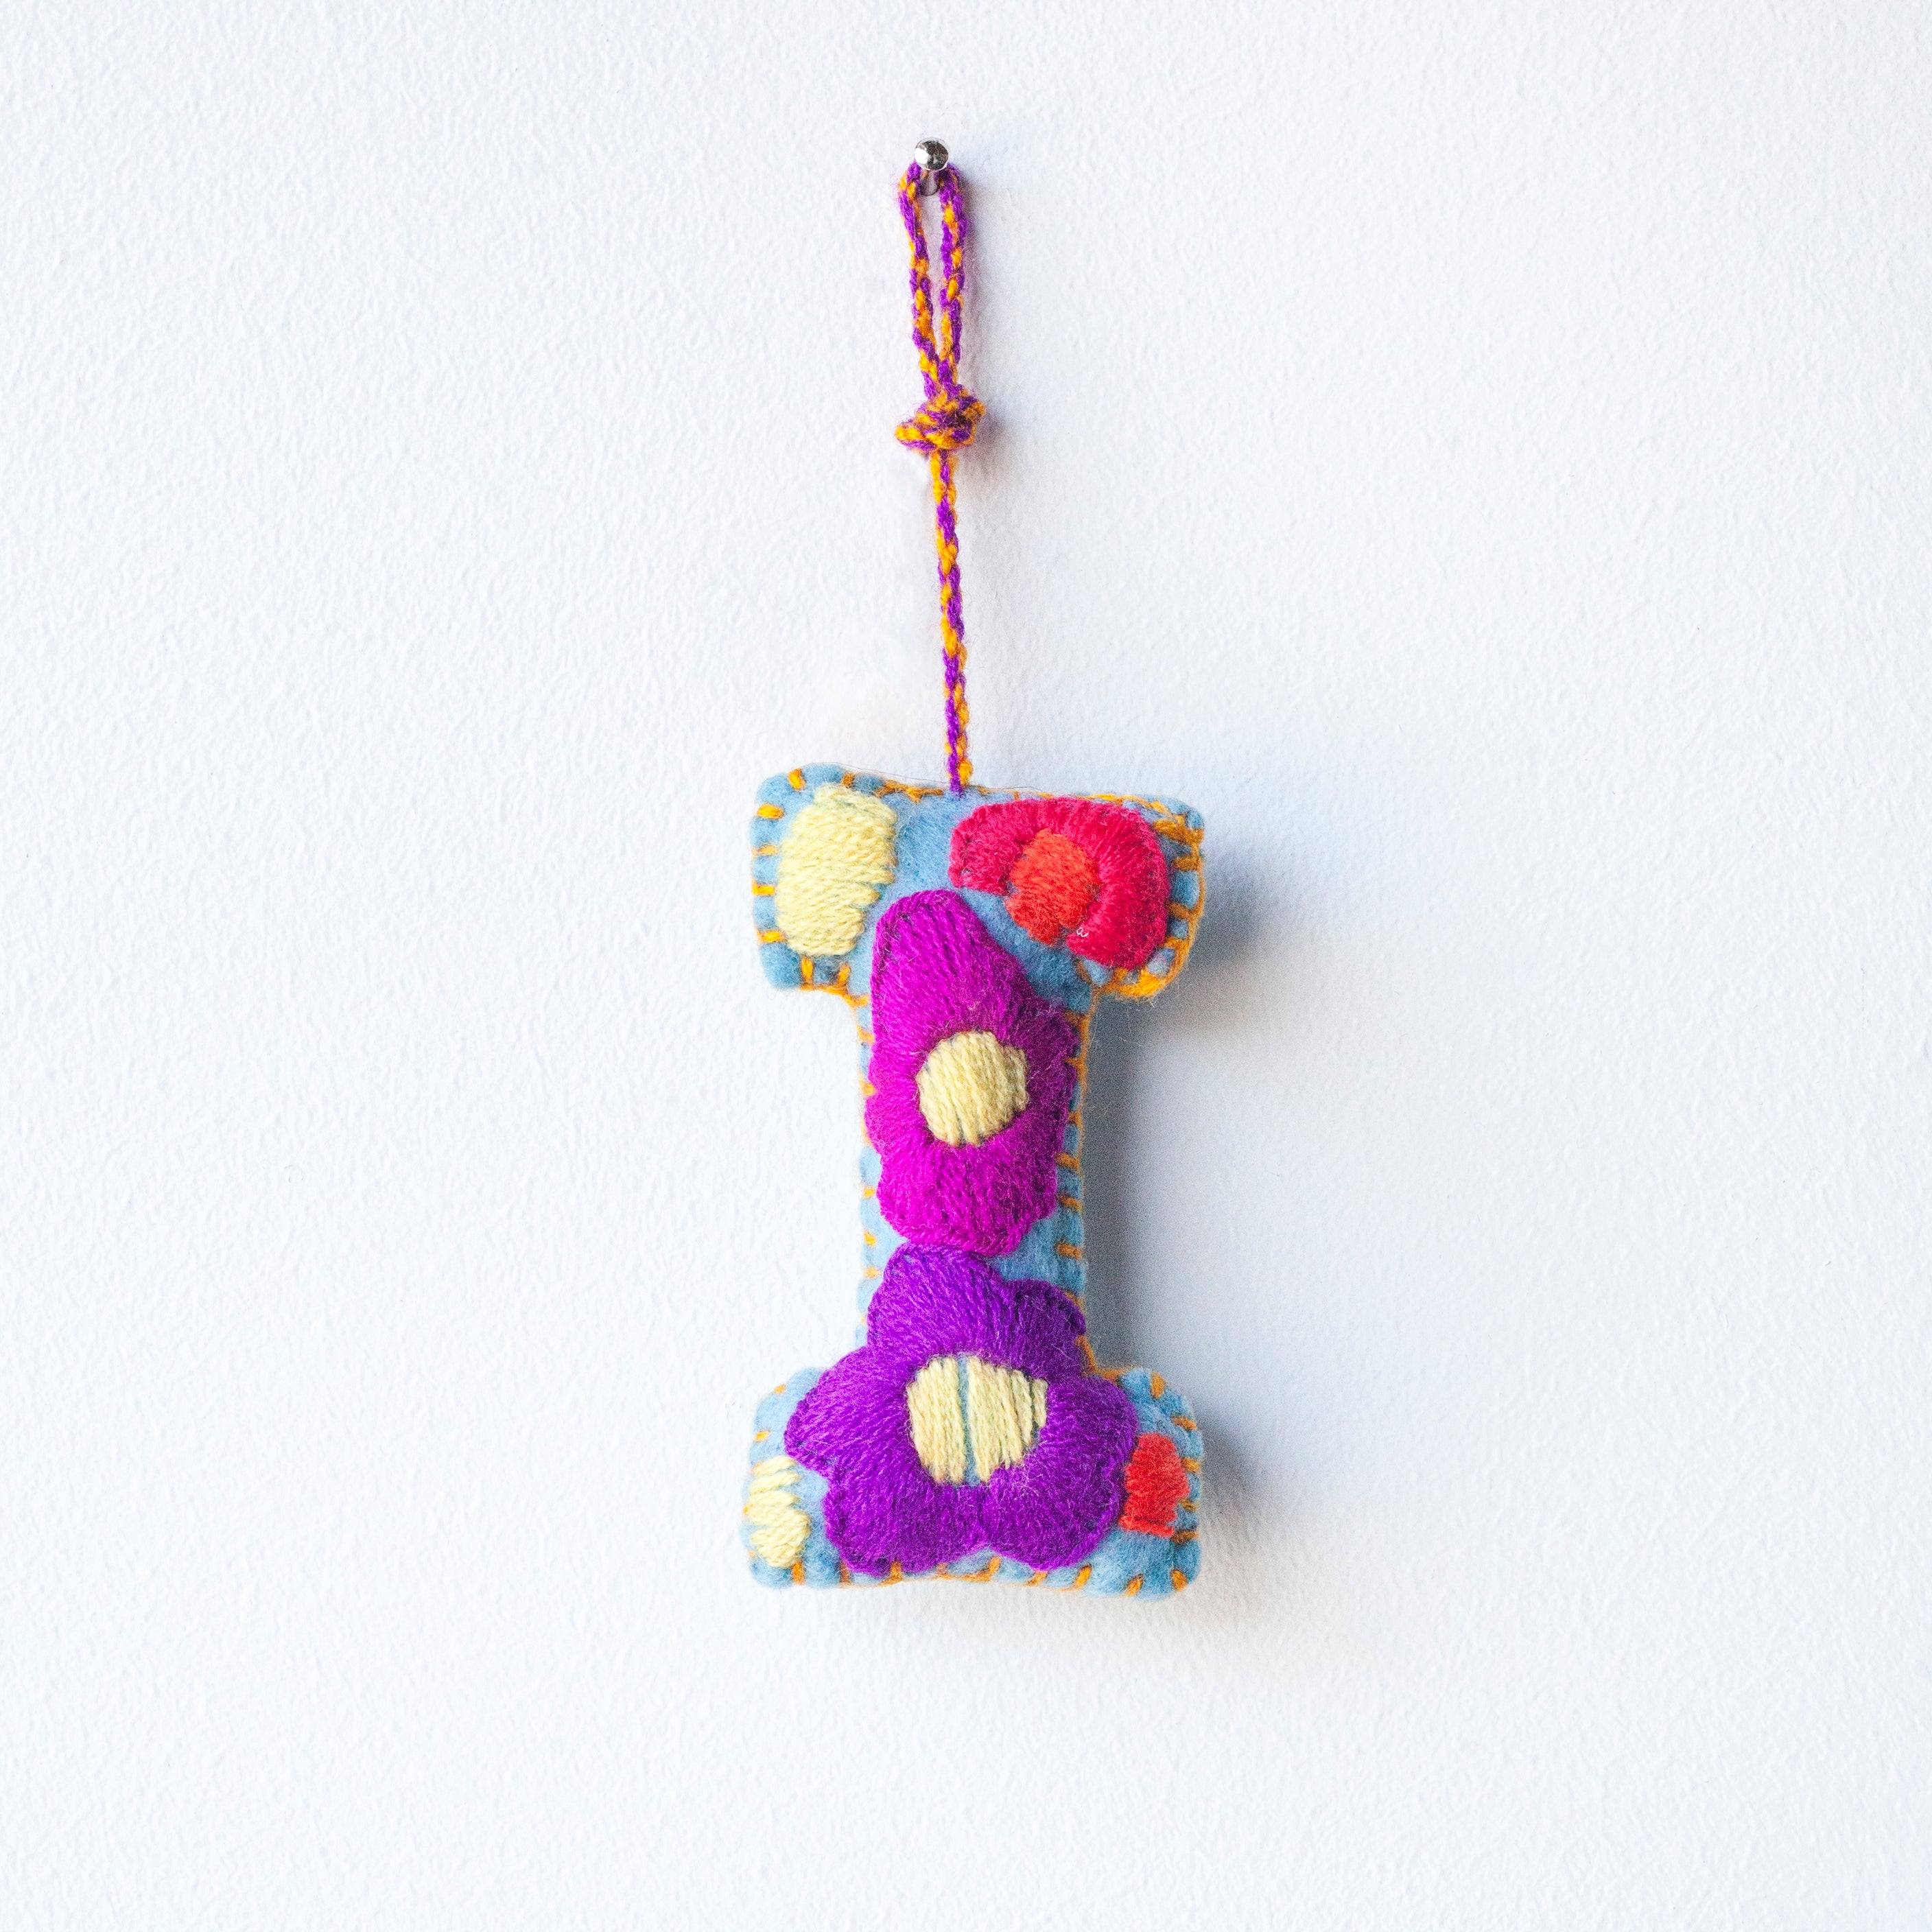 Colorful felt letter "I" with multicolor floral hand-embroidery hanging by a colorful string.